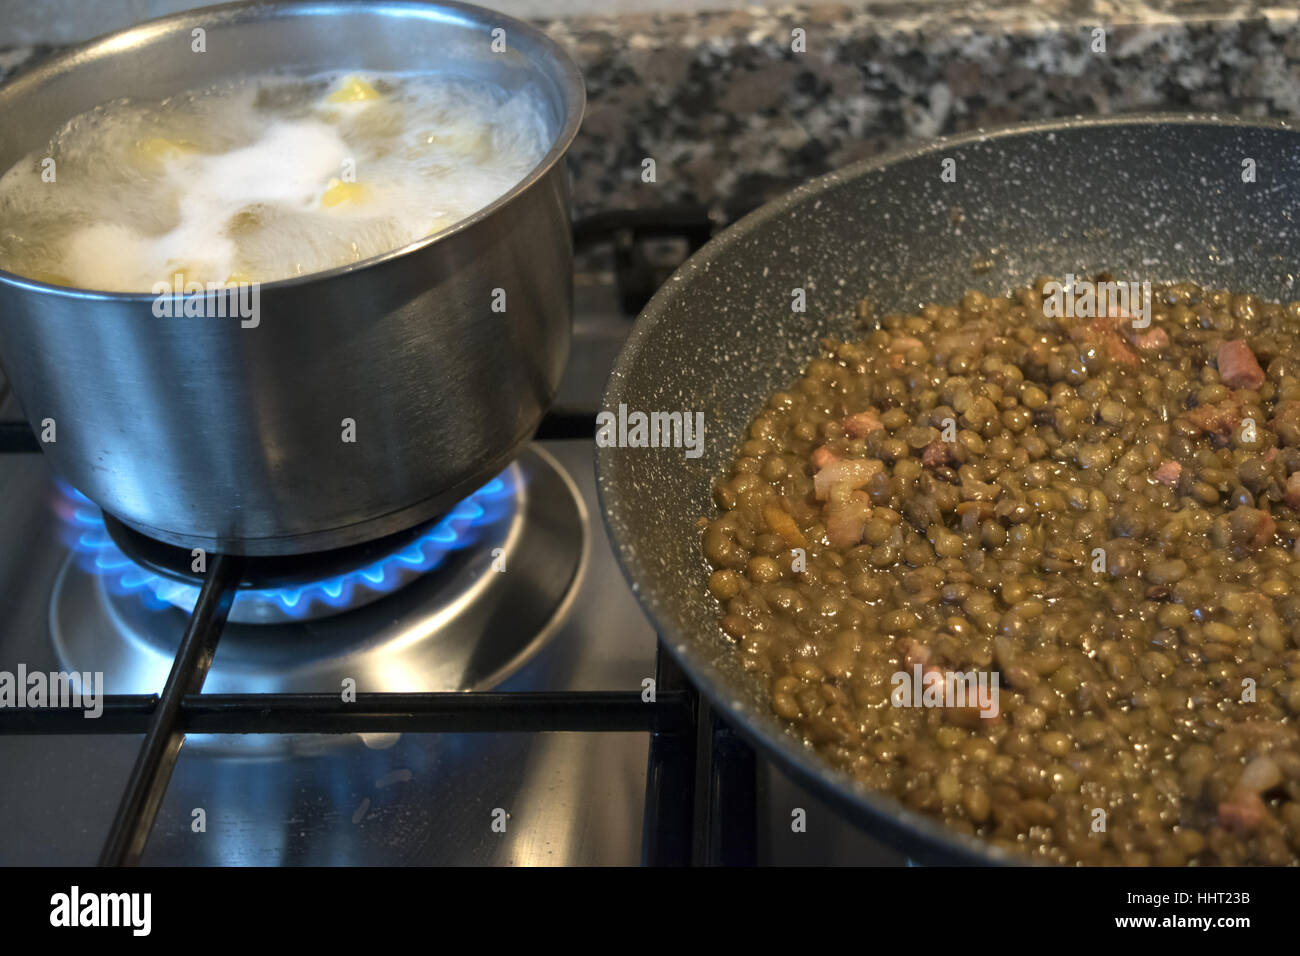 lentils and pasta cooking on the stove Stock Photo